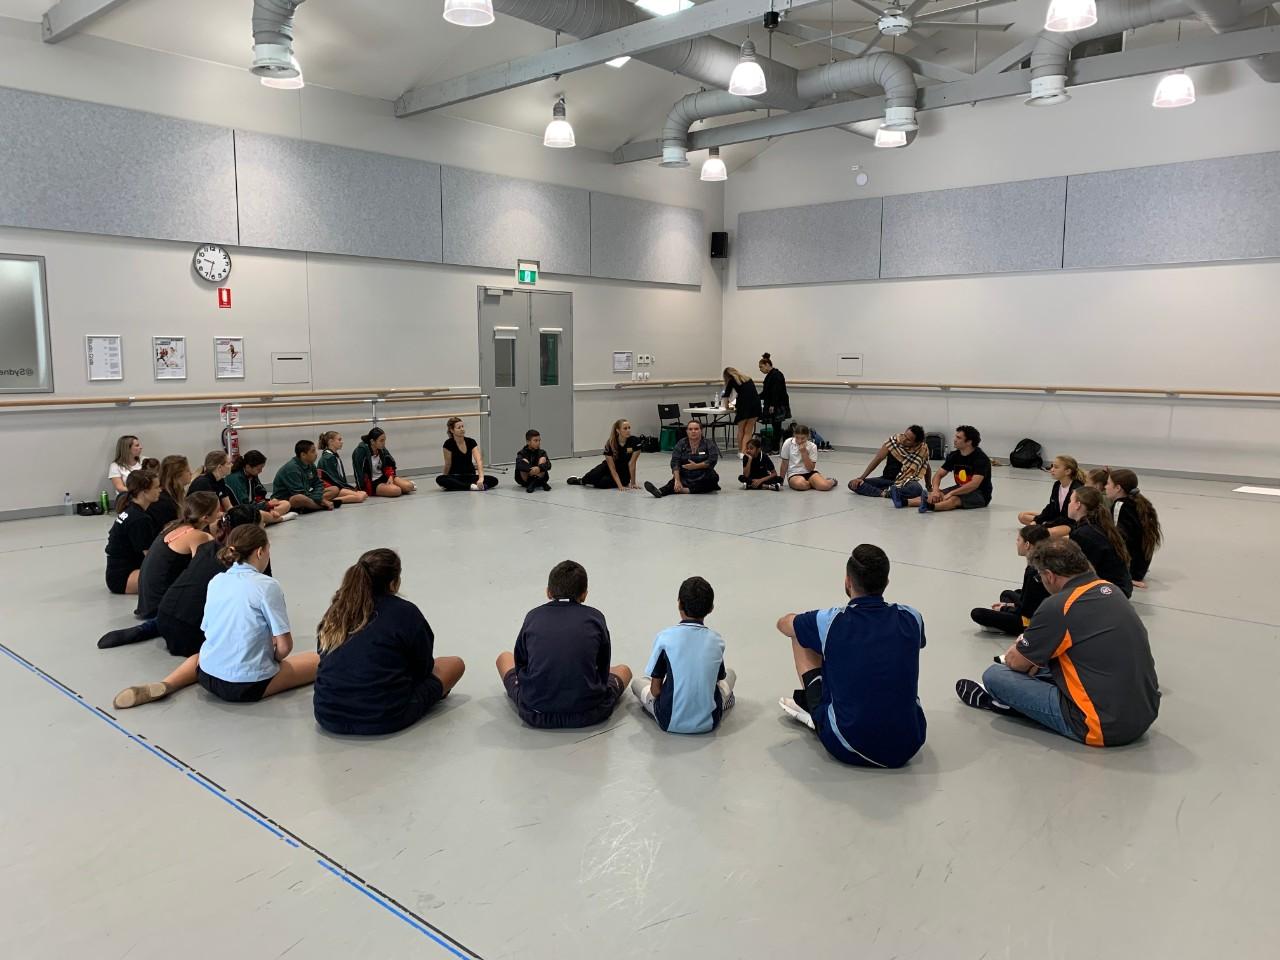 Students sitting in a large circle at the start of the Aboriginal Dance Workshop